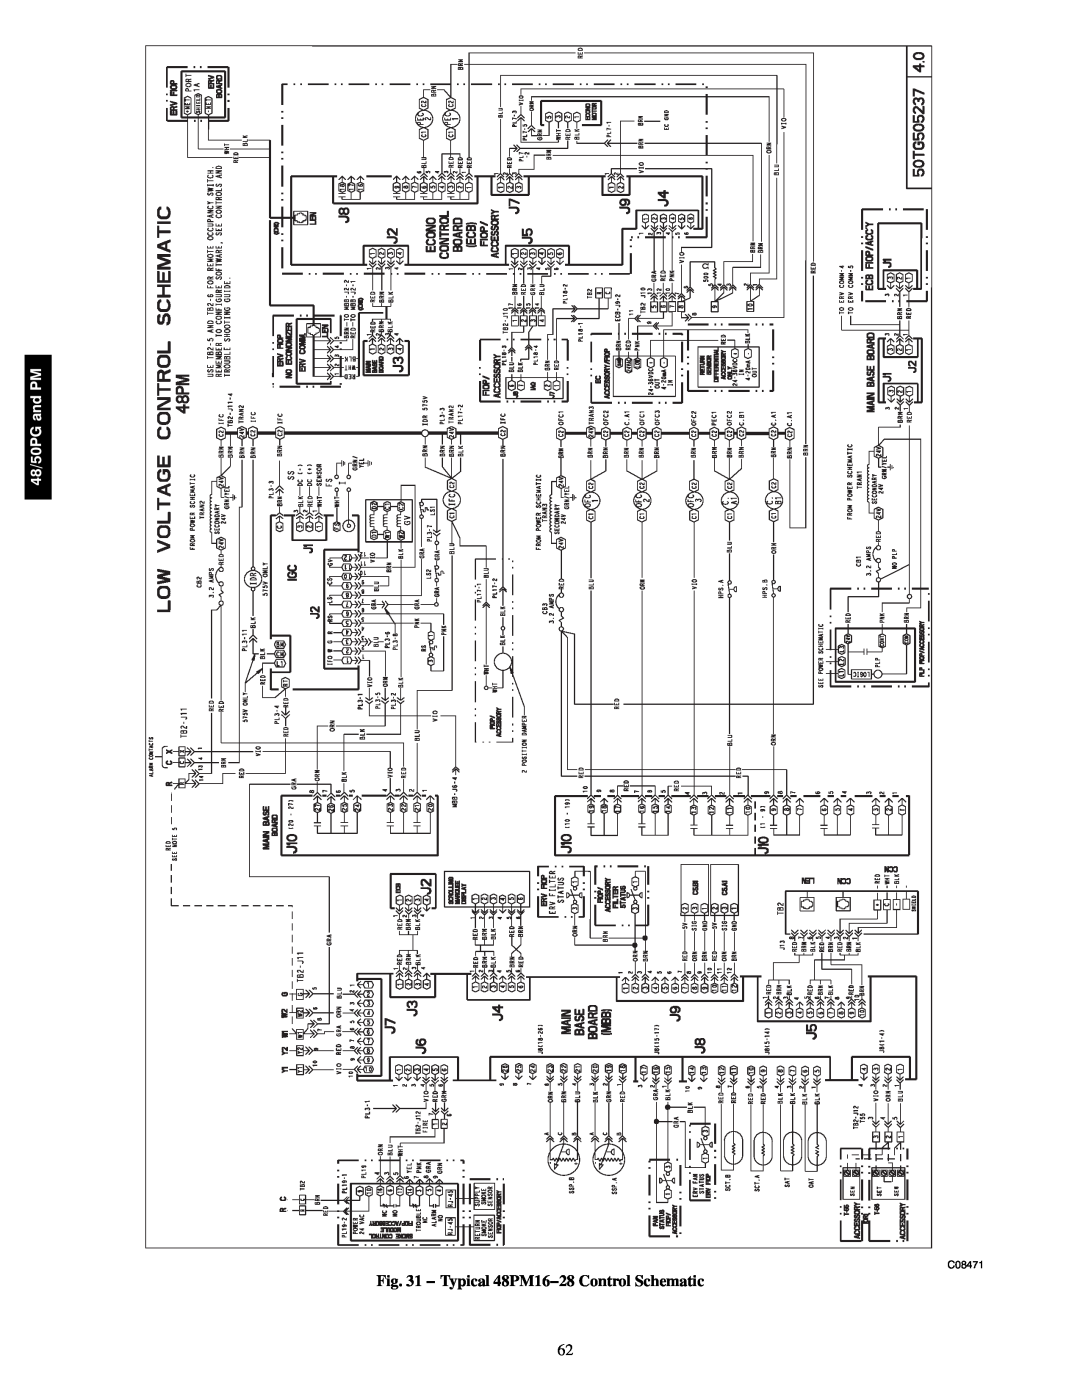 Carrier 48/50PG C03-14, 48/50PM C16-28 manual Typical 48PM16−28 Control Schematic, 48/50PG and PM, C08471 